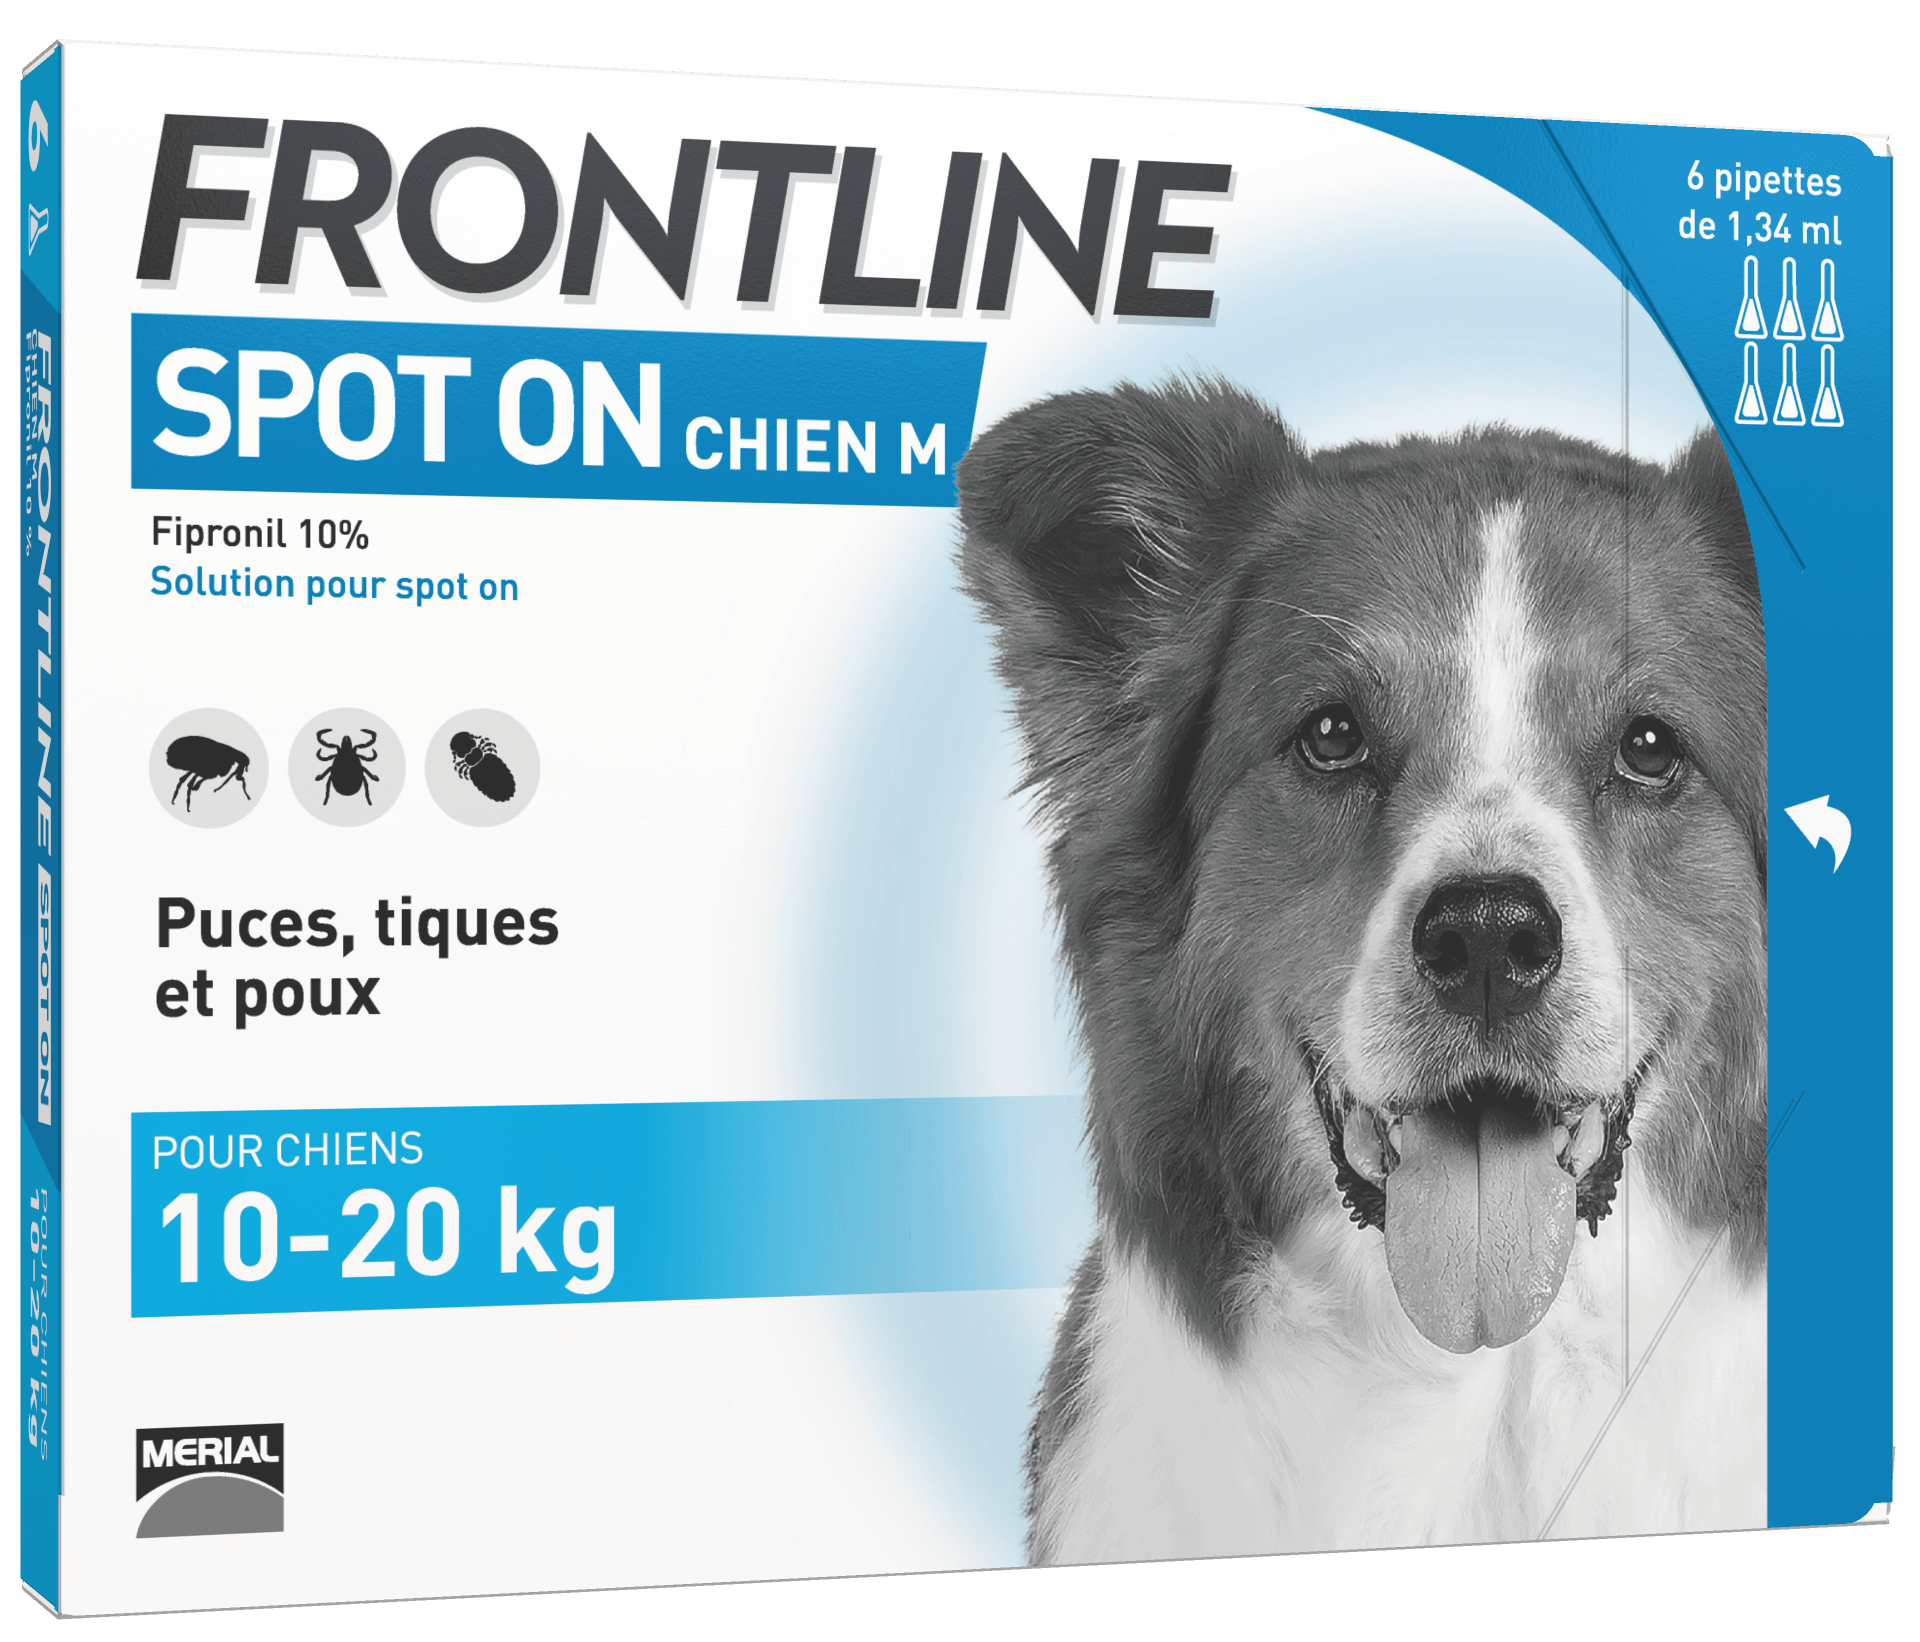 Pipettes FRONTLINE Spot-On Chien